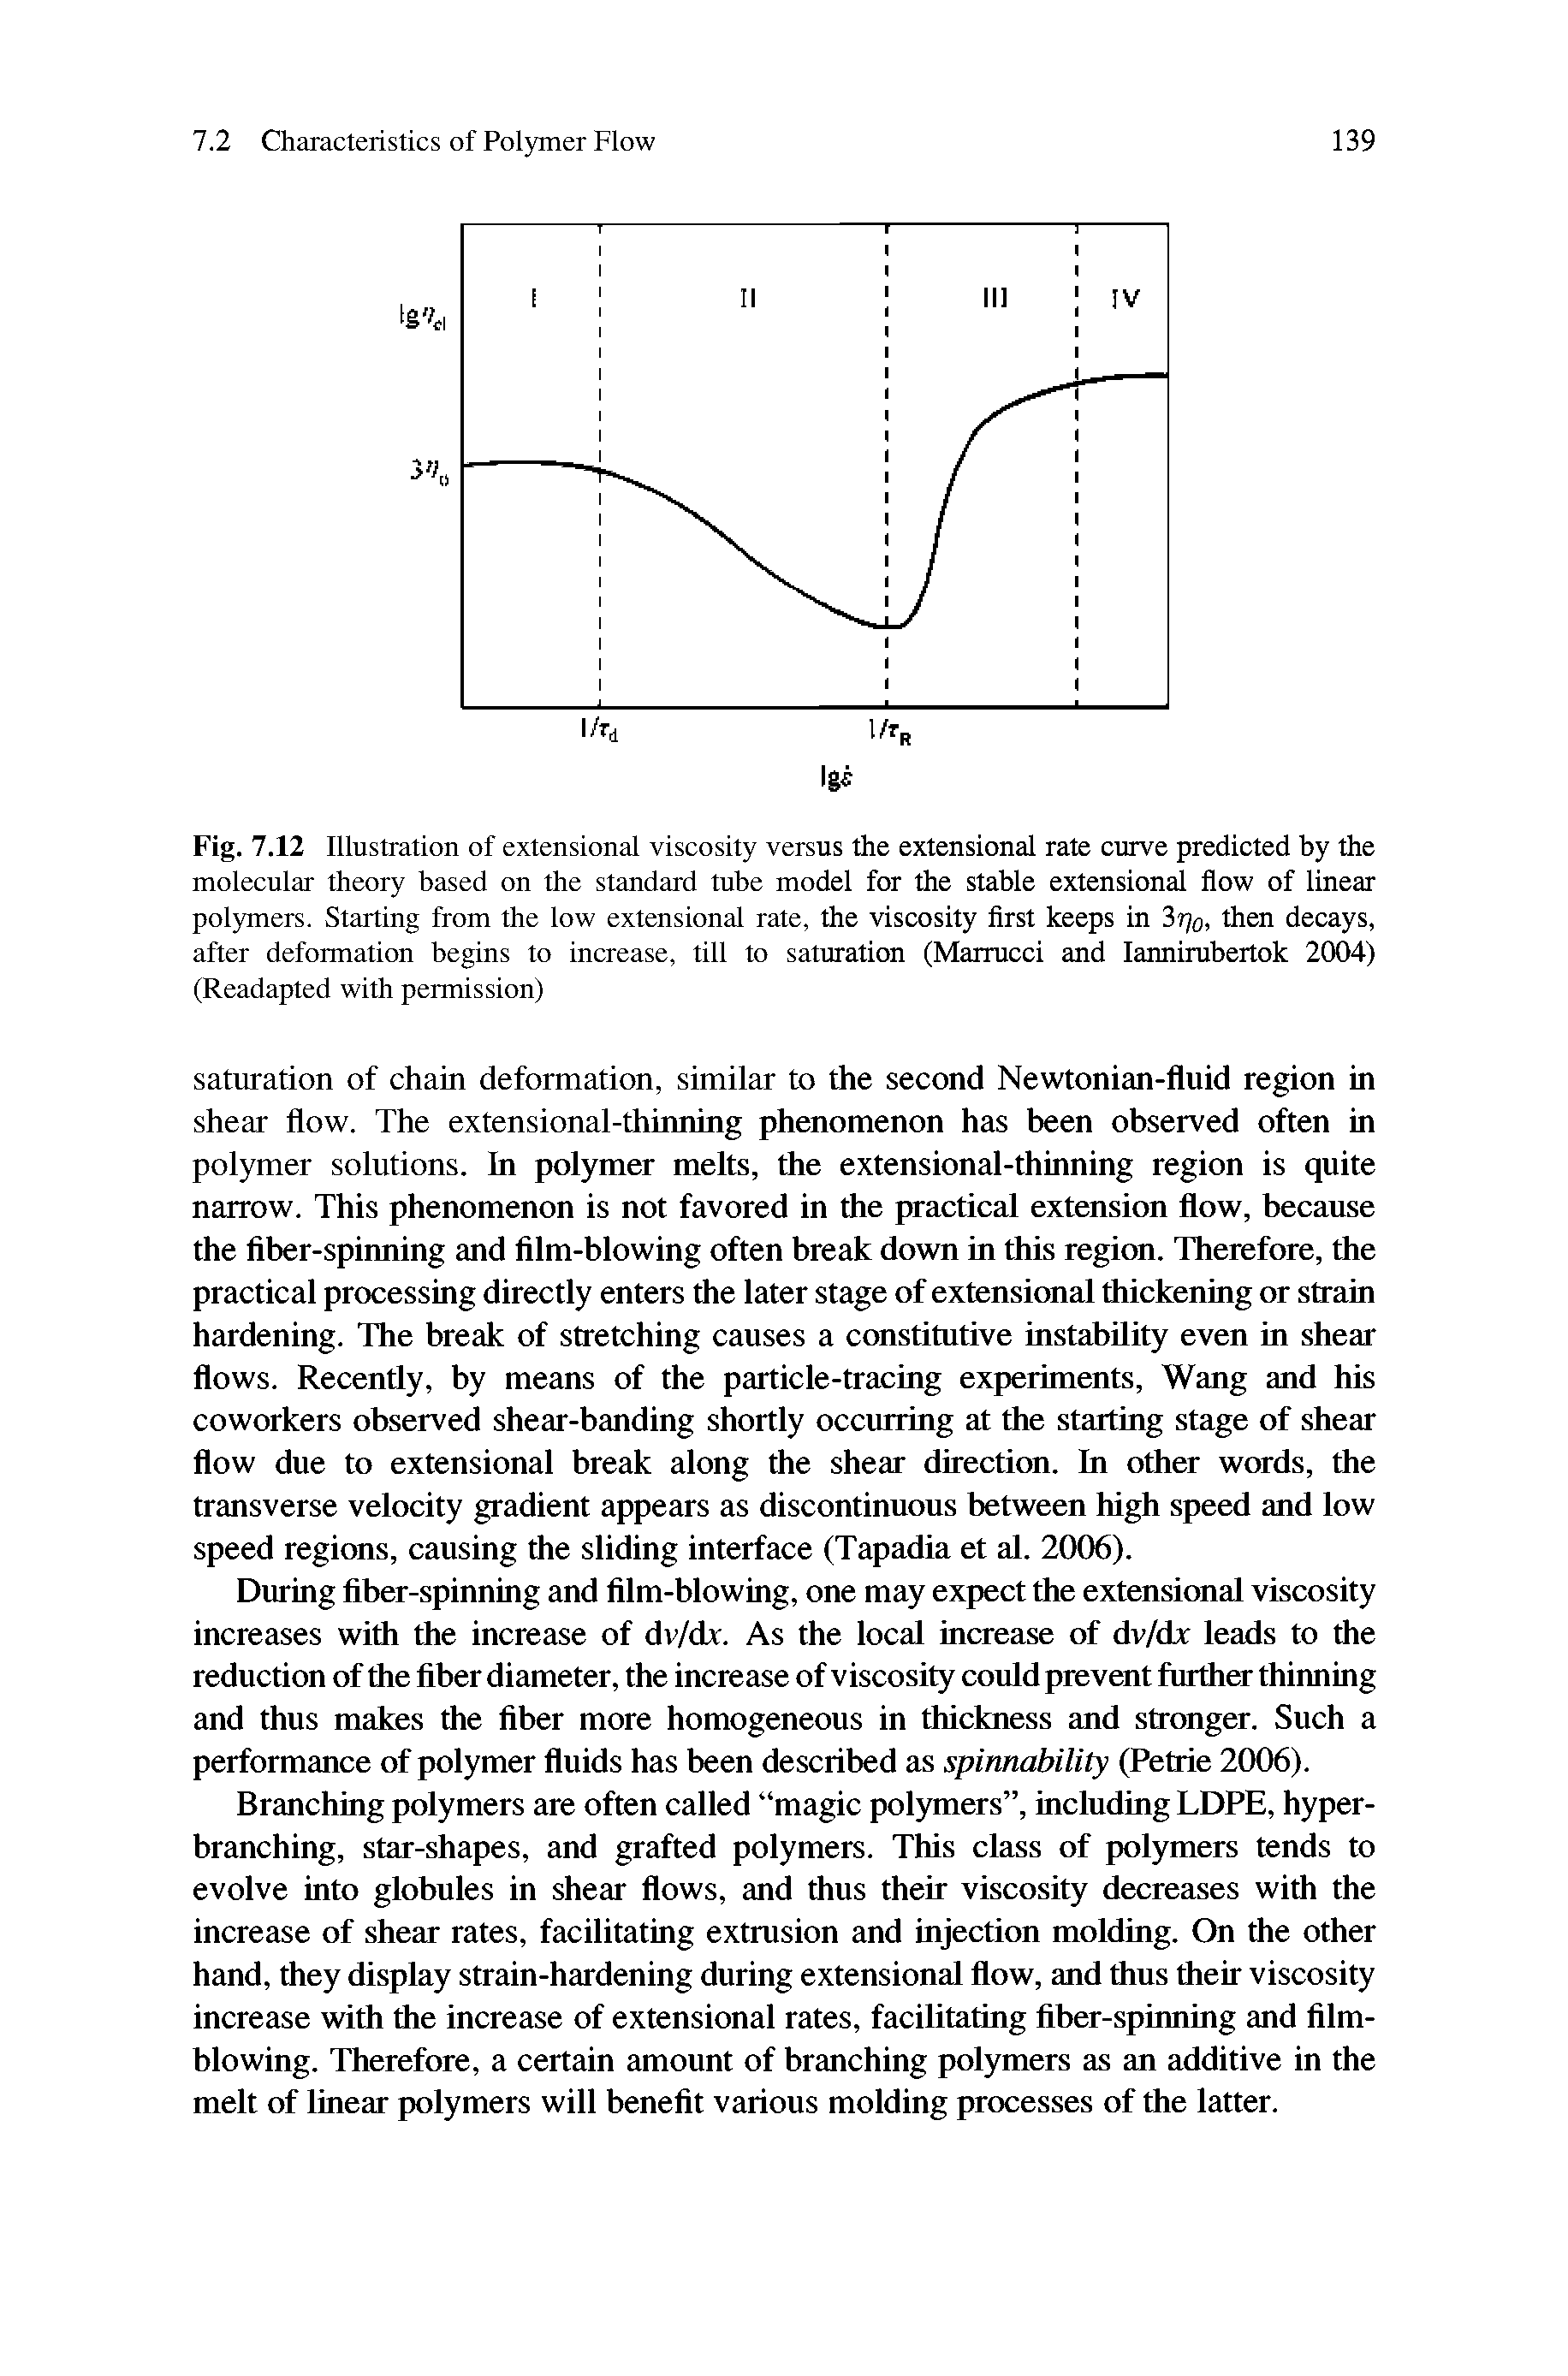 Fig. 7.12 Illustration of extensional viscosity versus the extensional rate curve predicted by the molecular theory based on the standard tube model for the stable extensional flow of linear polymers. Starting from the low extensional rate, the viscosity first keeps in 3%, then decays, after deformation begins to increase, till to saturation (Marrucci and lannirubertok 2004) (Readapted with permission)...